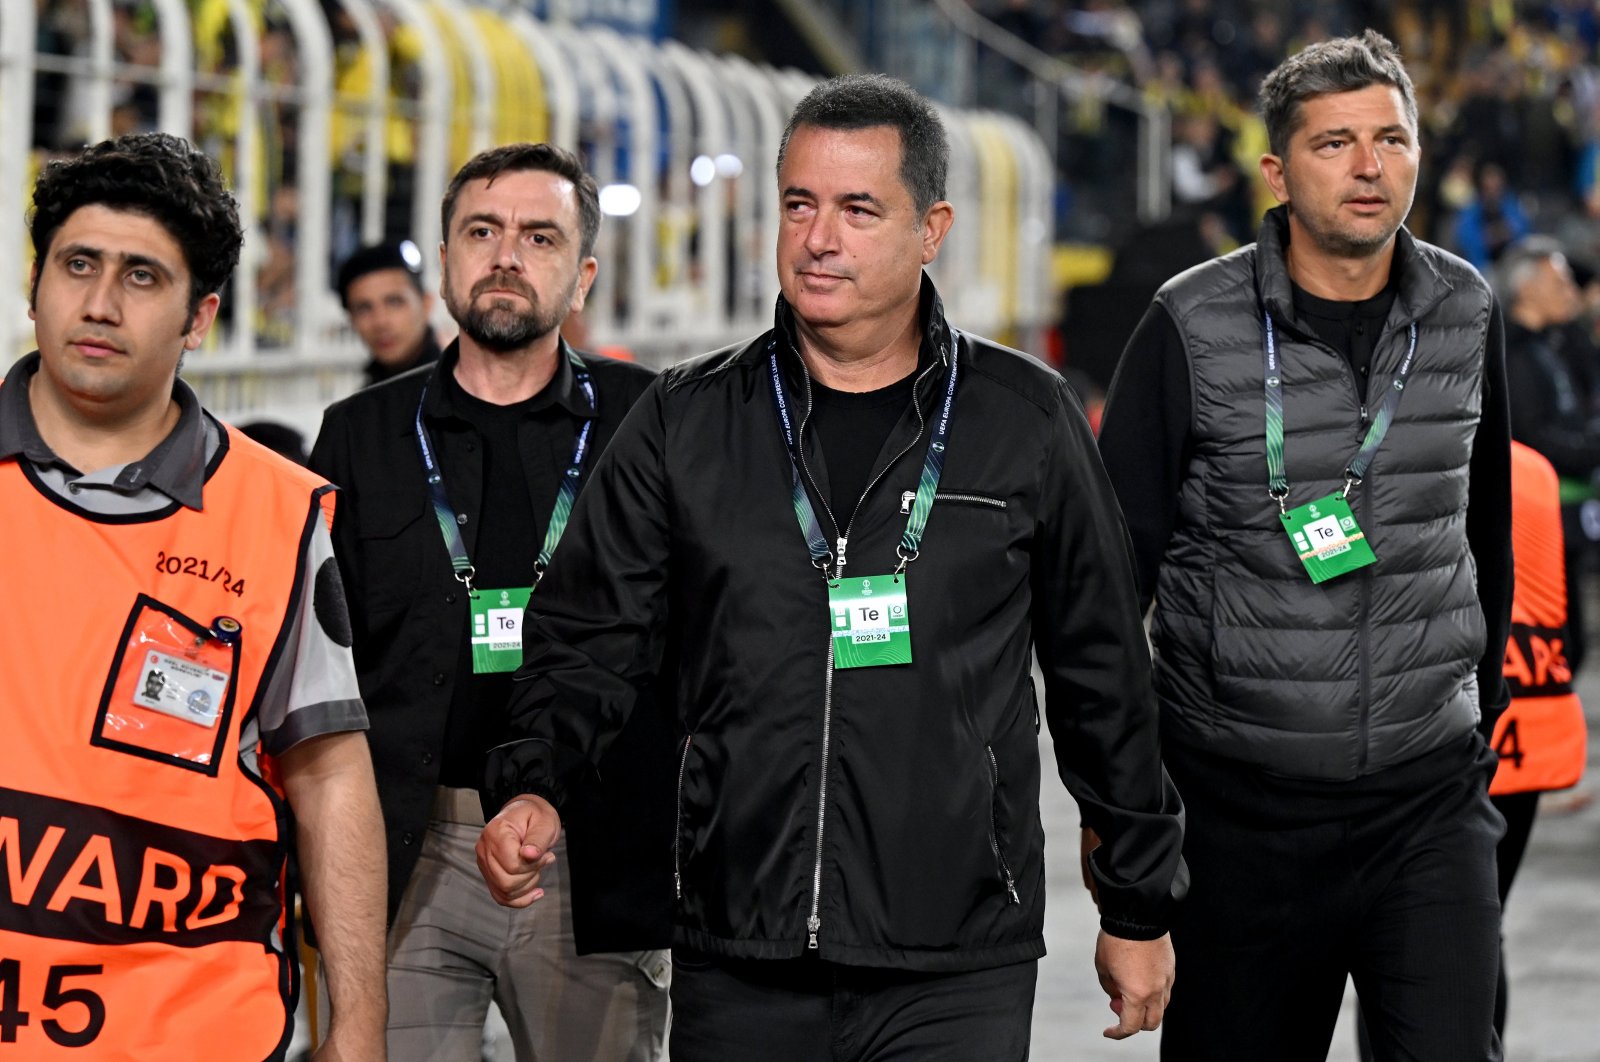 Turkish media mogul and Hull City owner Acun Ilıcalı (2nd R) arrives at the Conference League match between Fenerbahçe and Olympiacos, Istanbul, Türkiye, April 18, 2024. (AA Photo)